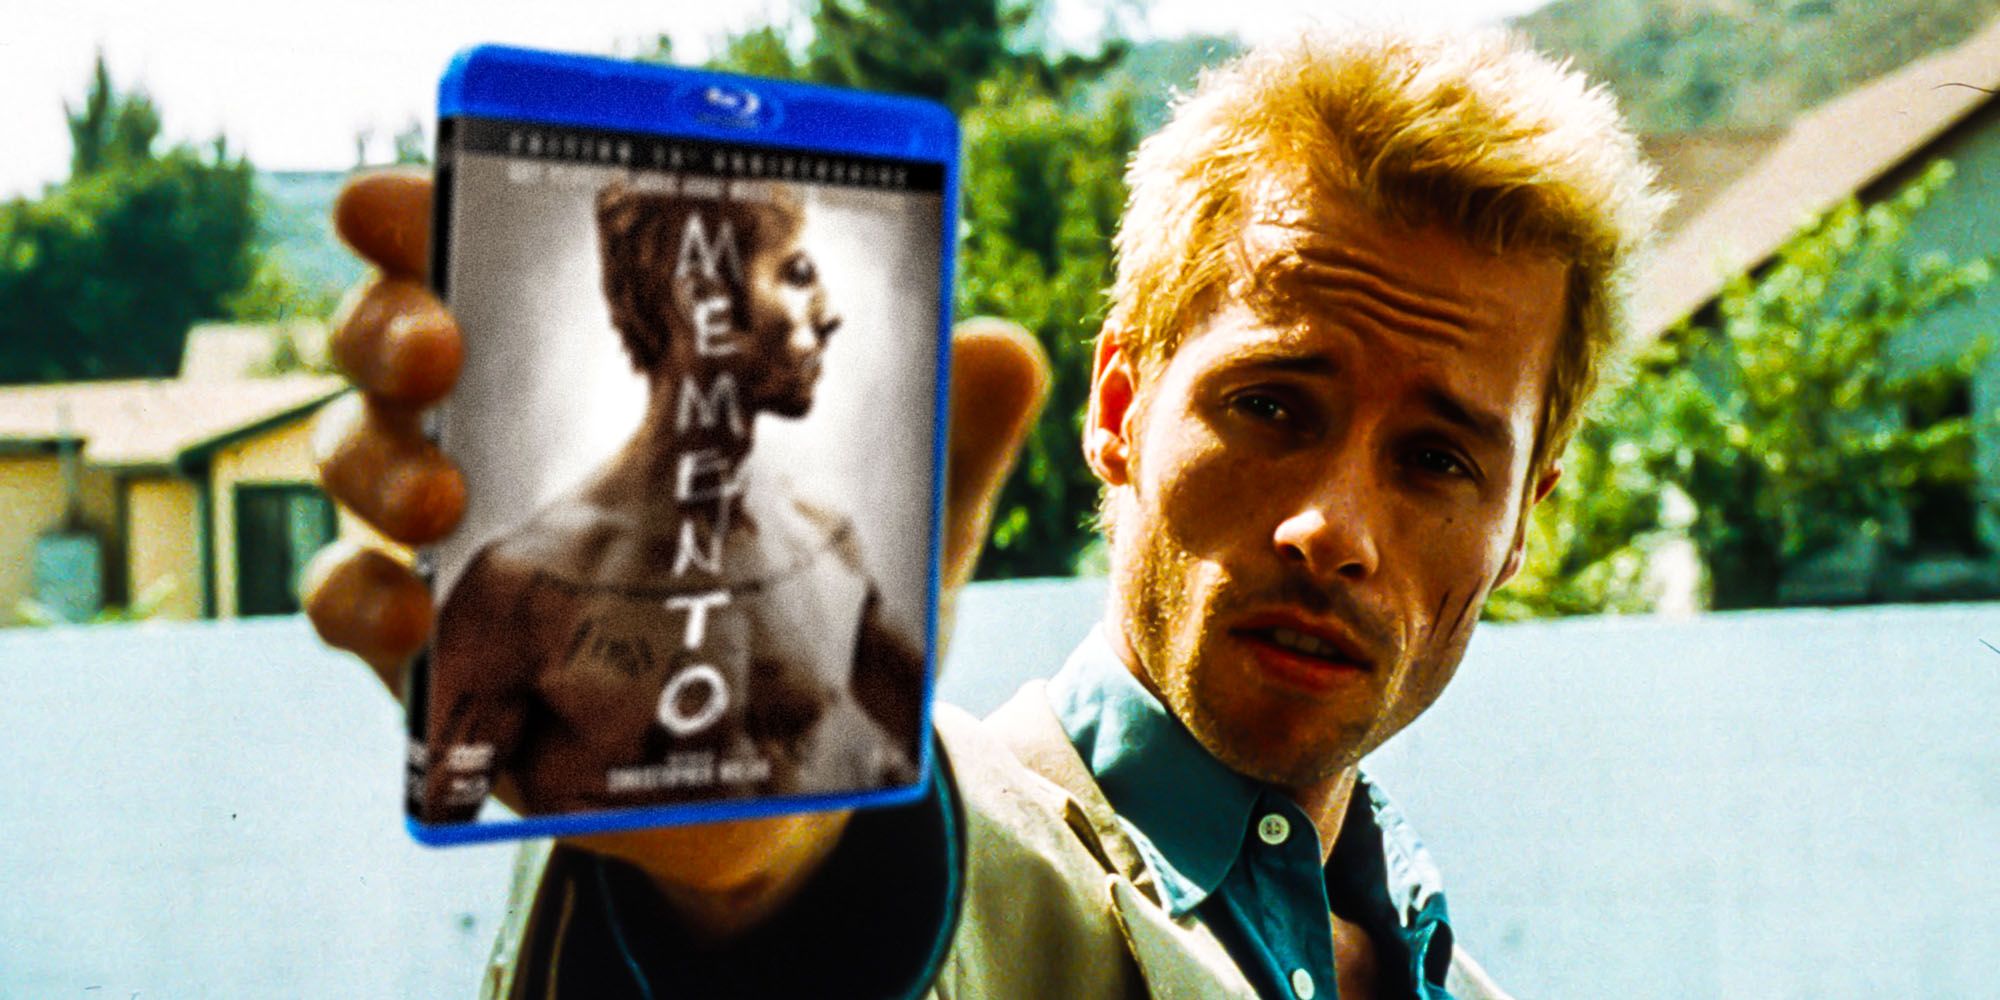 The Memento BluRays Best Extra Plays The Movie In Chronological Order